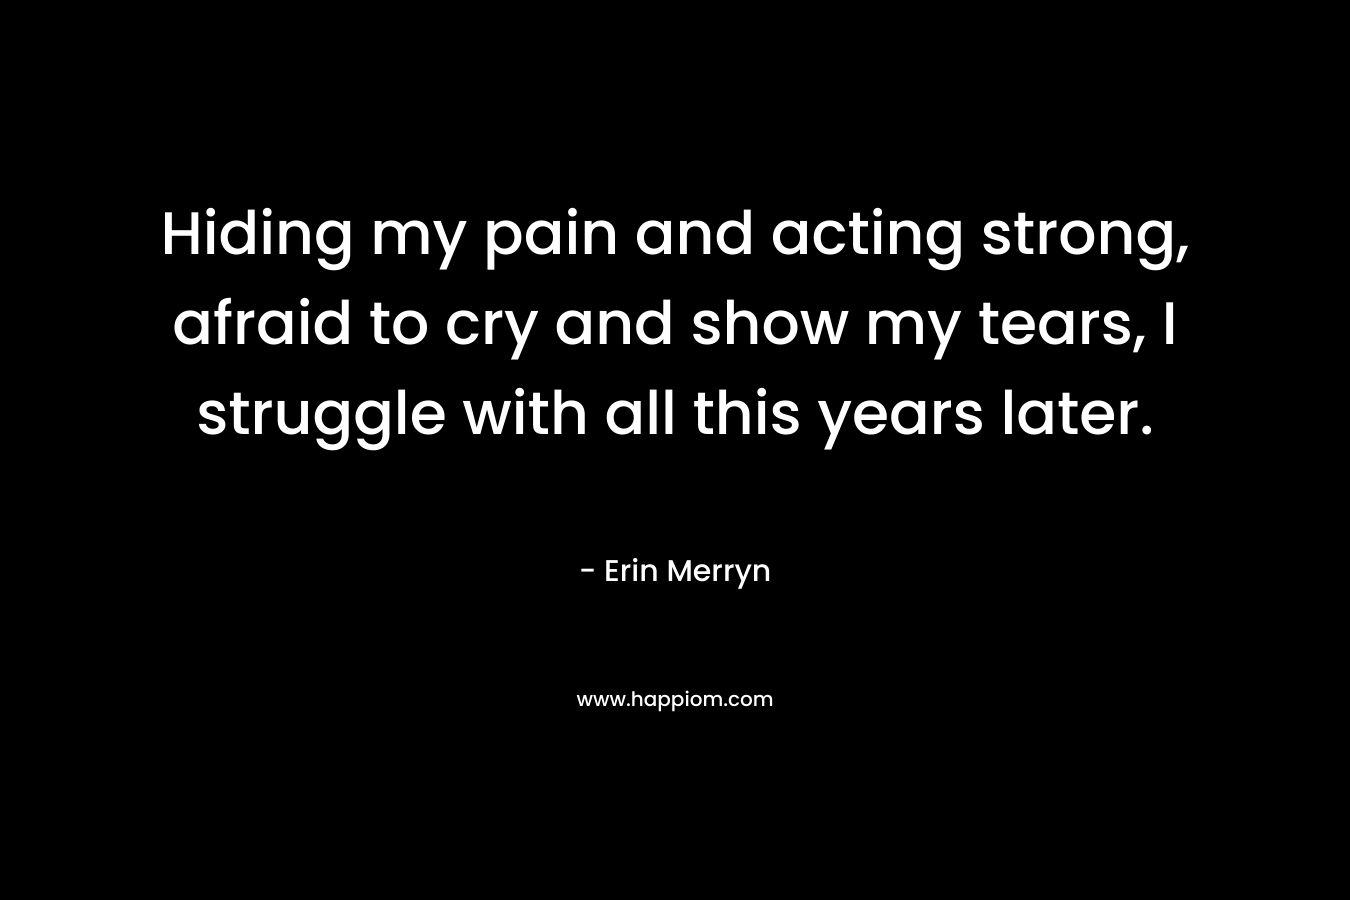 Hiding my pain and acting strong, afraid to cry and show my tears, I struggle with all this years later. – Erin Merryn